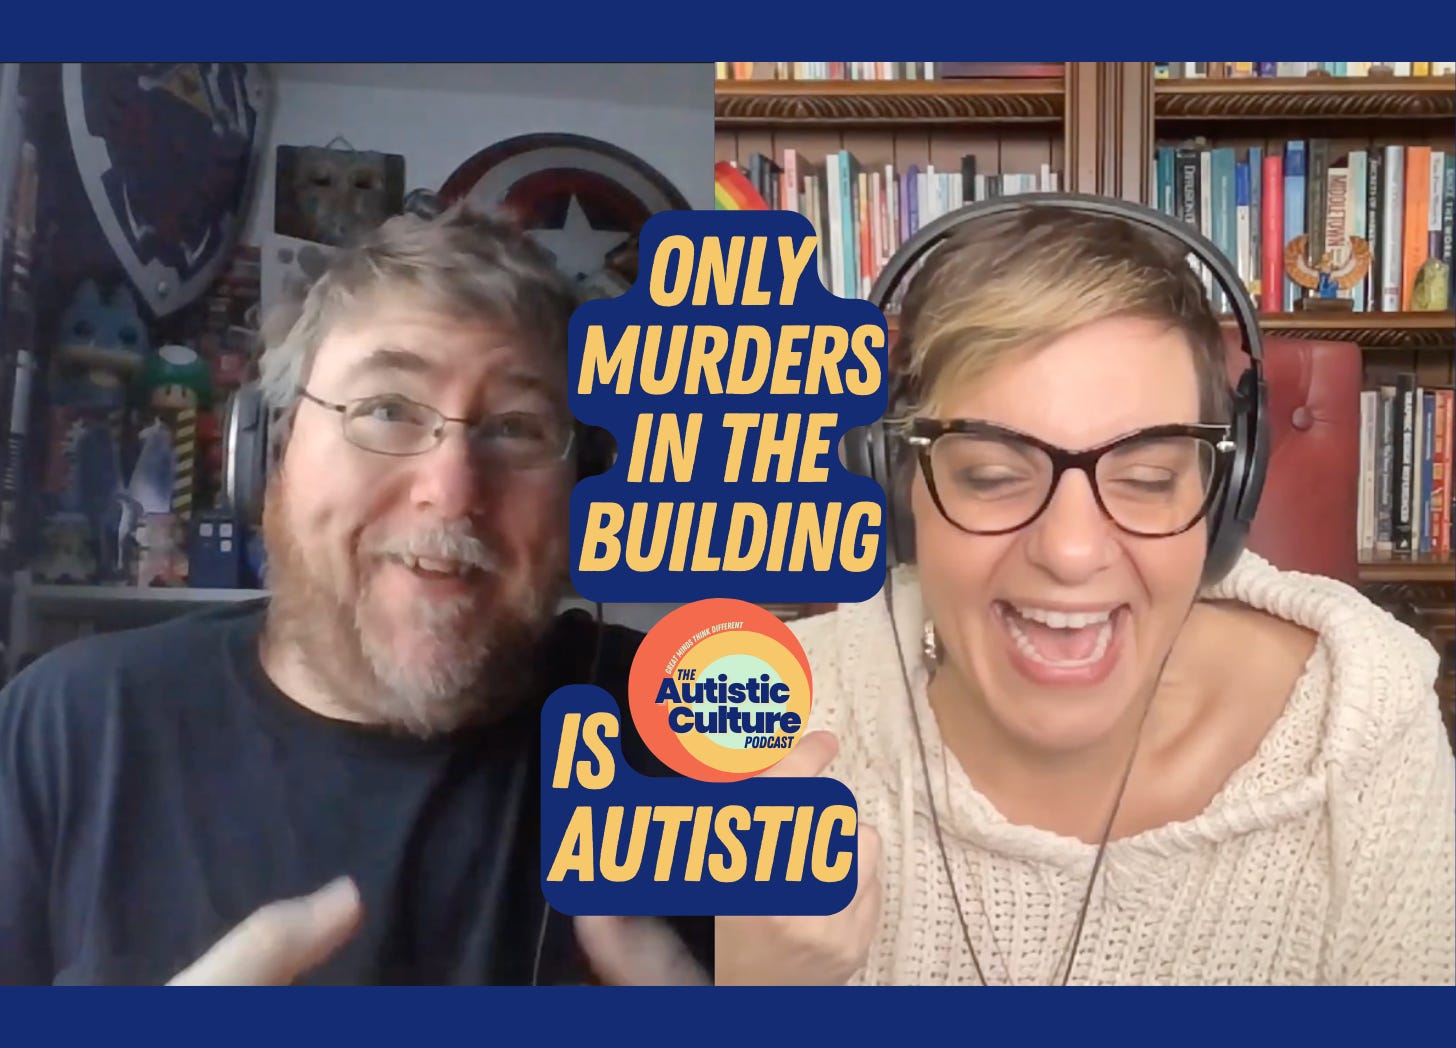 Autistic hosts, Dr. Angela Lauria and Matt Lowry, LPP, discuss Only Murders in the Building is Autistic